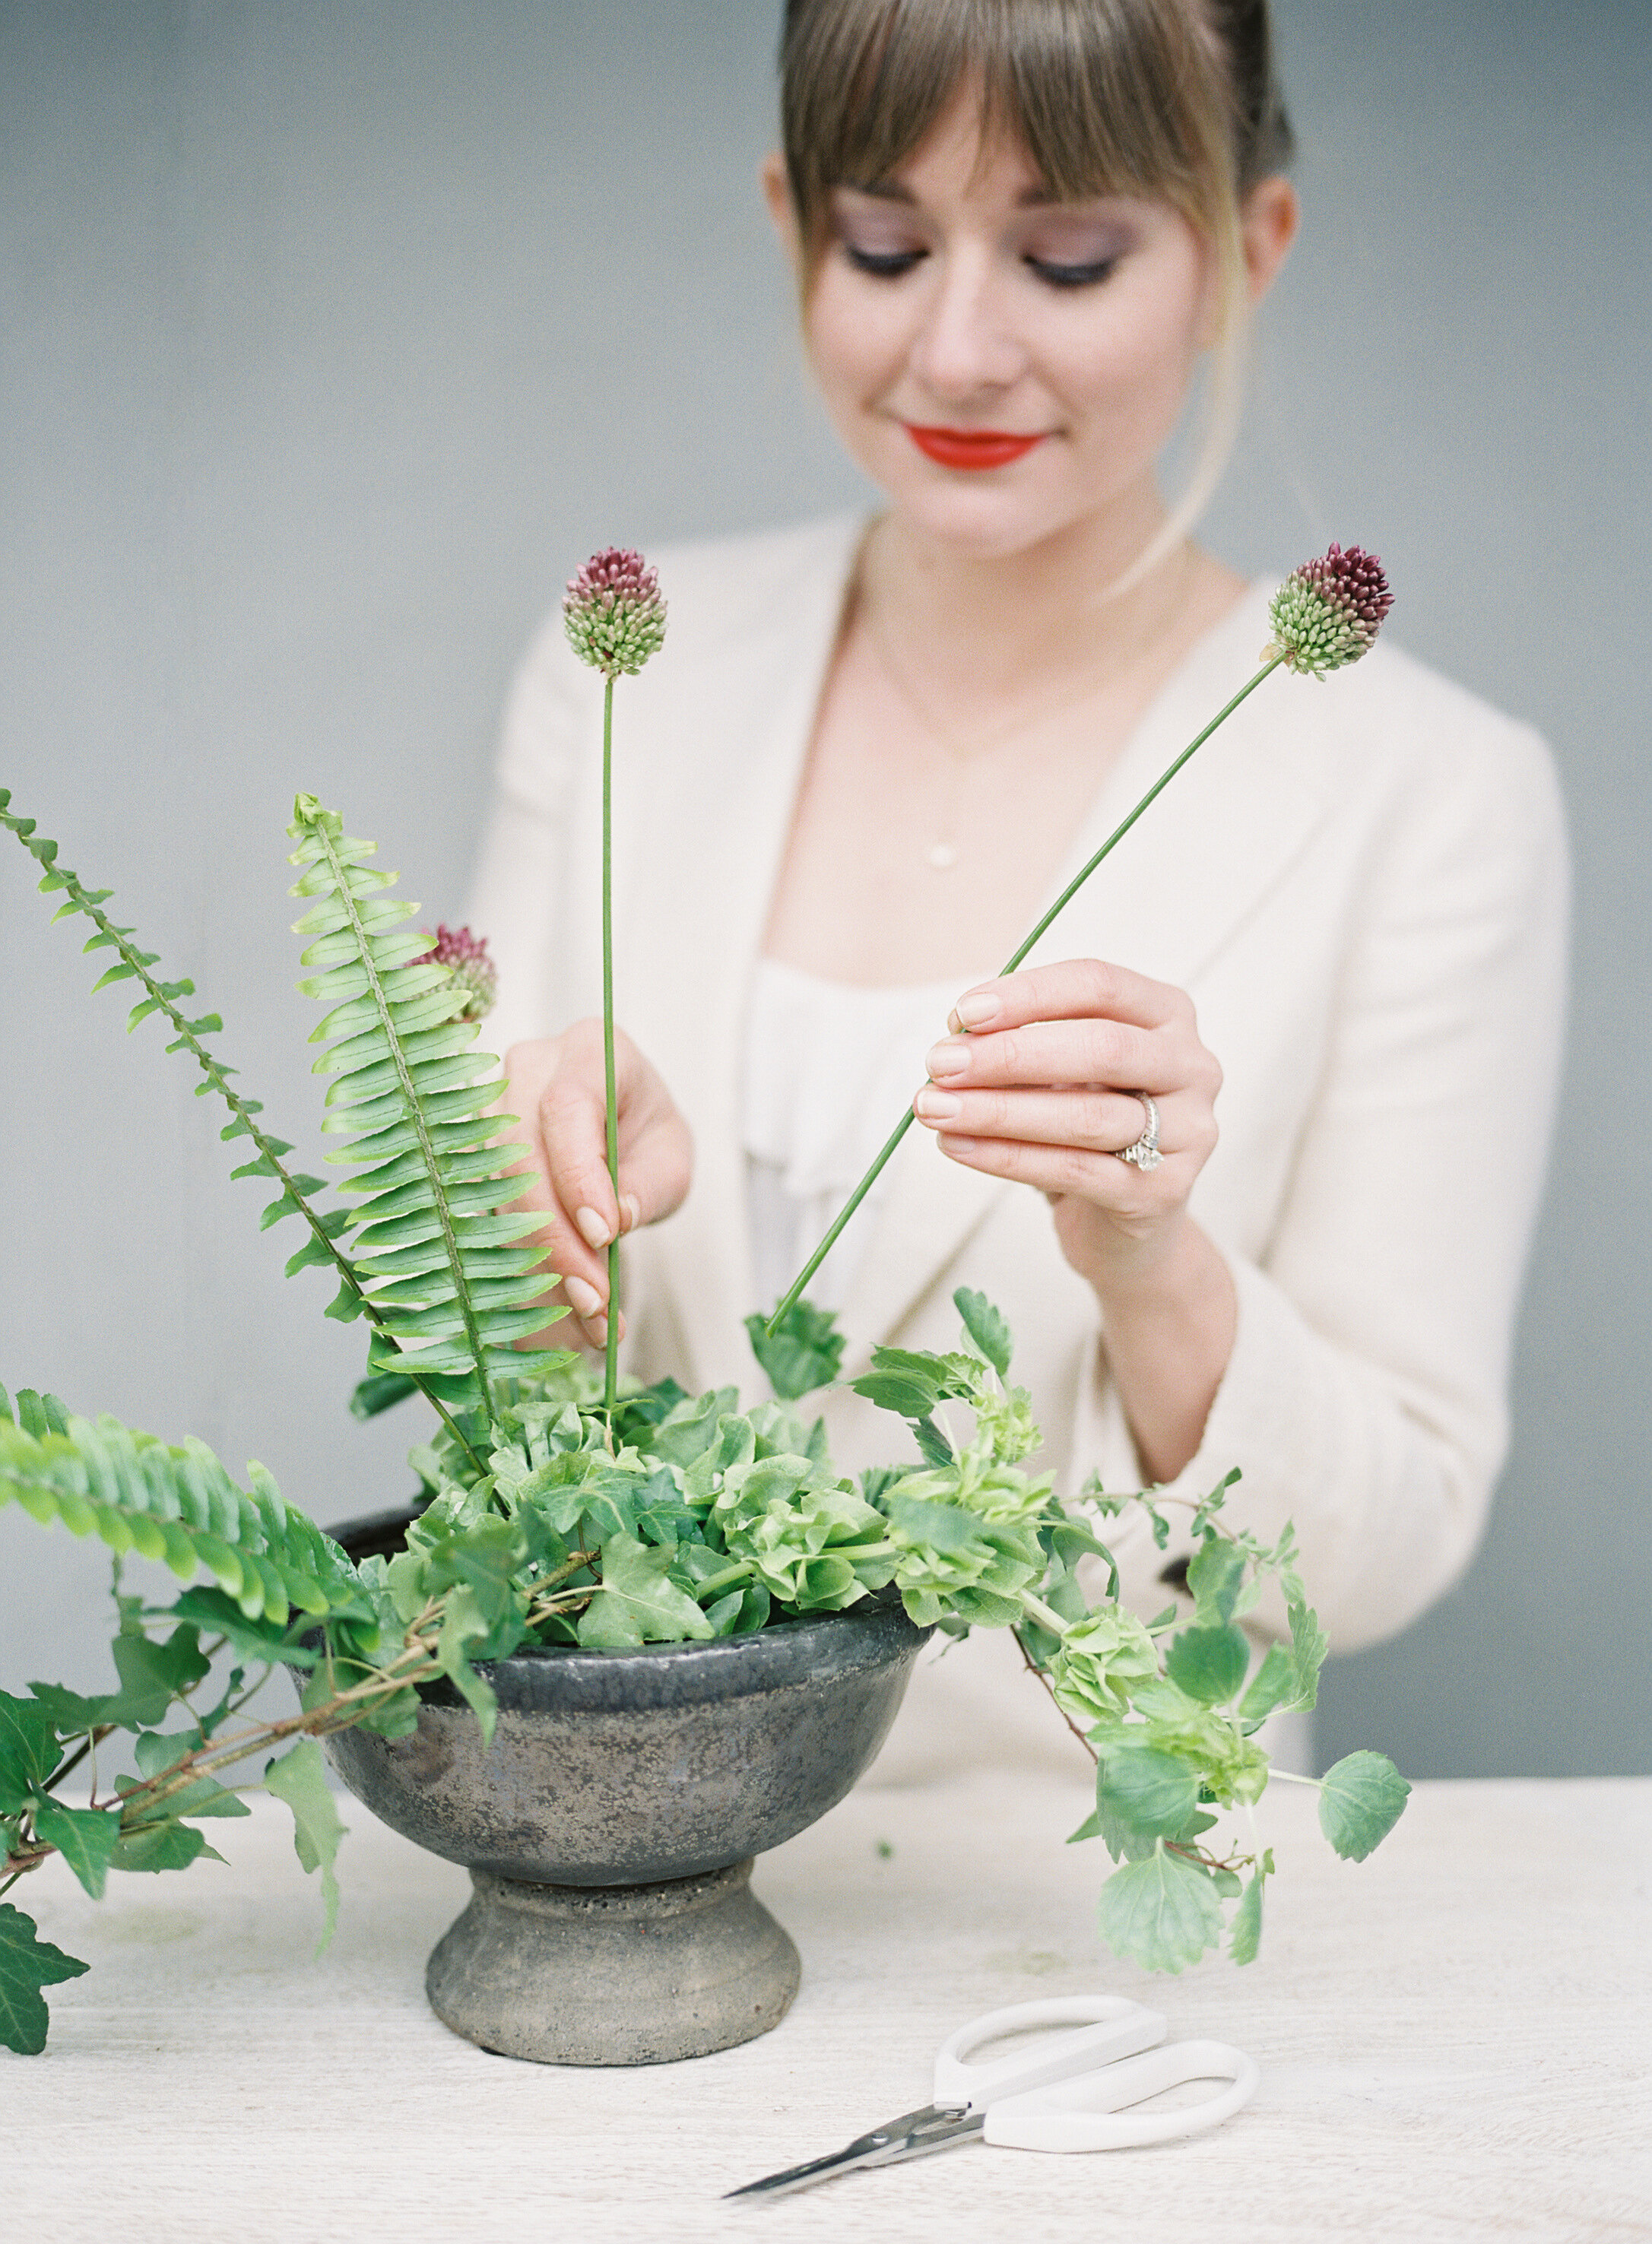 Shortening Corsage Pins - Tips and Tricks from Professional Florist